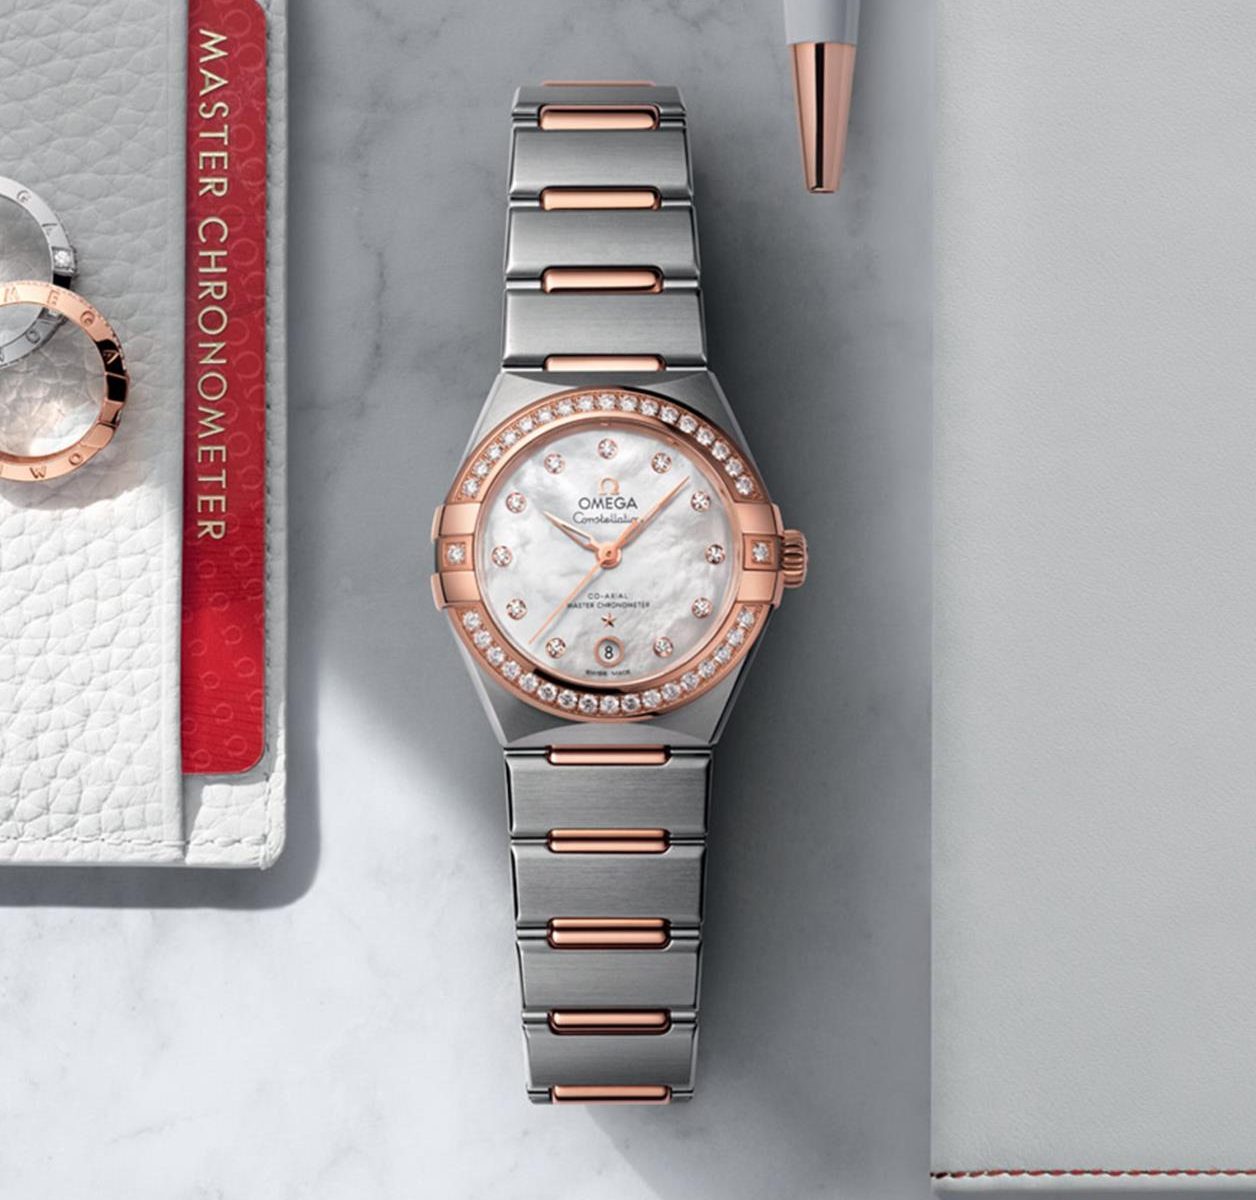 The 29mm fake watch is designed for women.